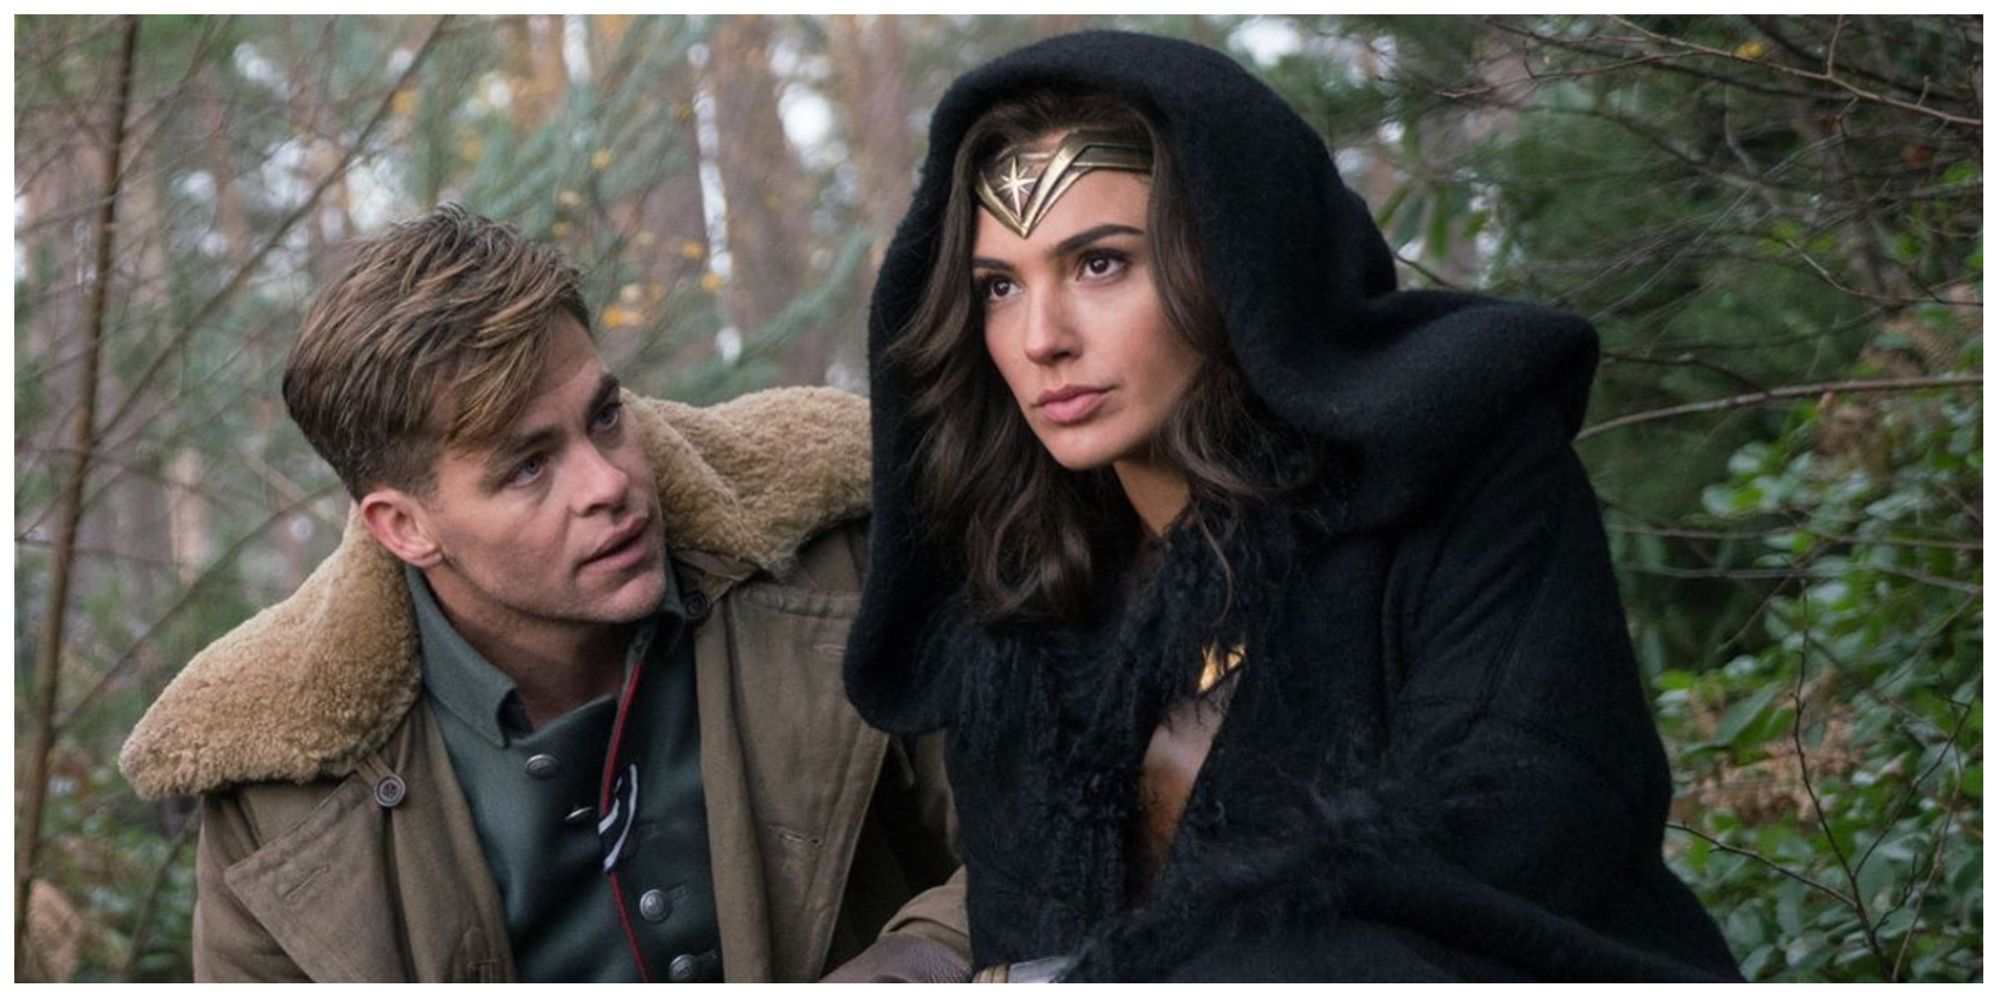 Steve and Diana in Wonder Woman 